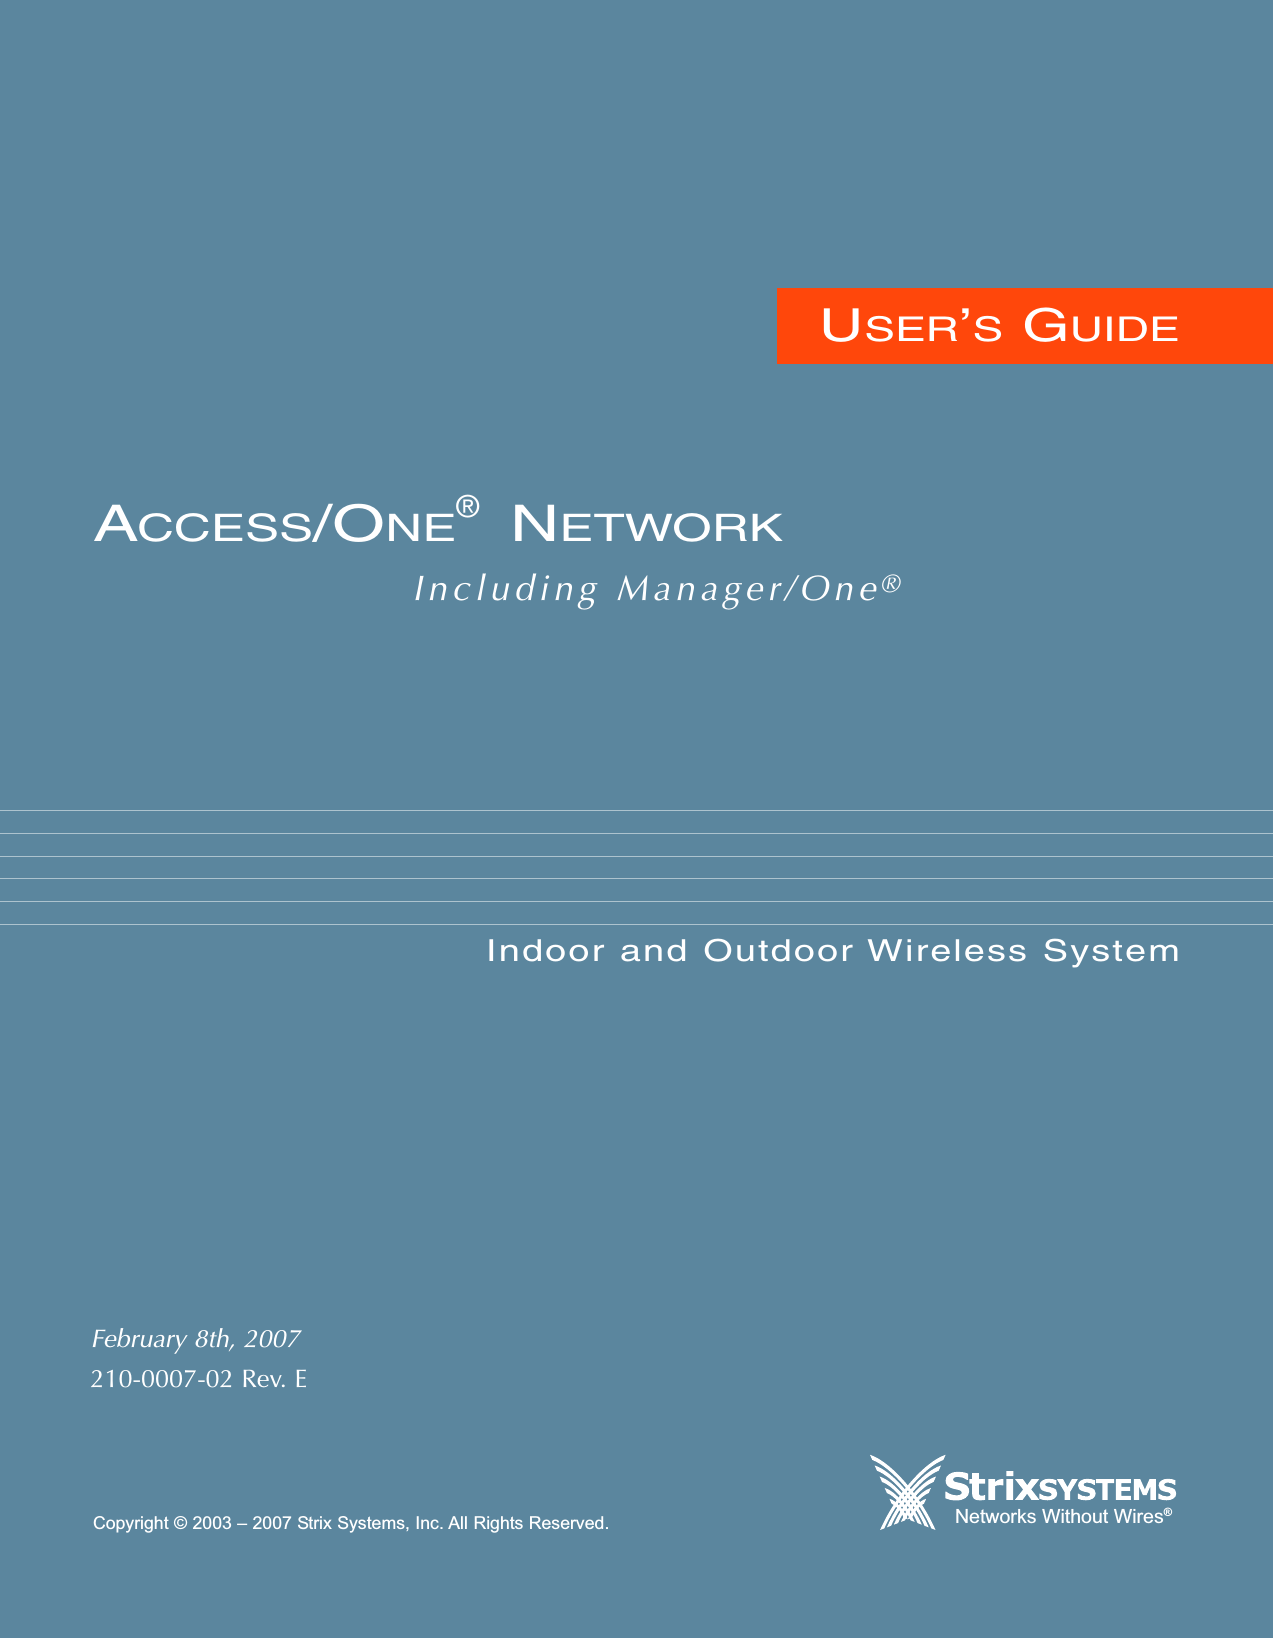 USER’SGUIDEIncluding Manager/One®ACCESS/ONE®NETWORKIndoor and Outdoor Wireless SystemNetworks Without Wires®Copyright © 2003 – 2007 Strix Systems, Inc. All Rights Reserved.February 8th, 2007210-0007-02 Rev. E